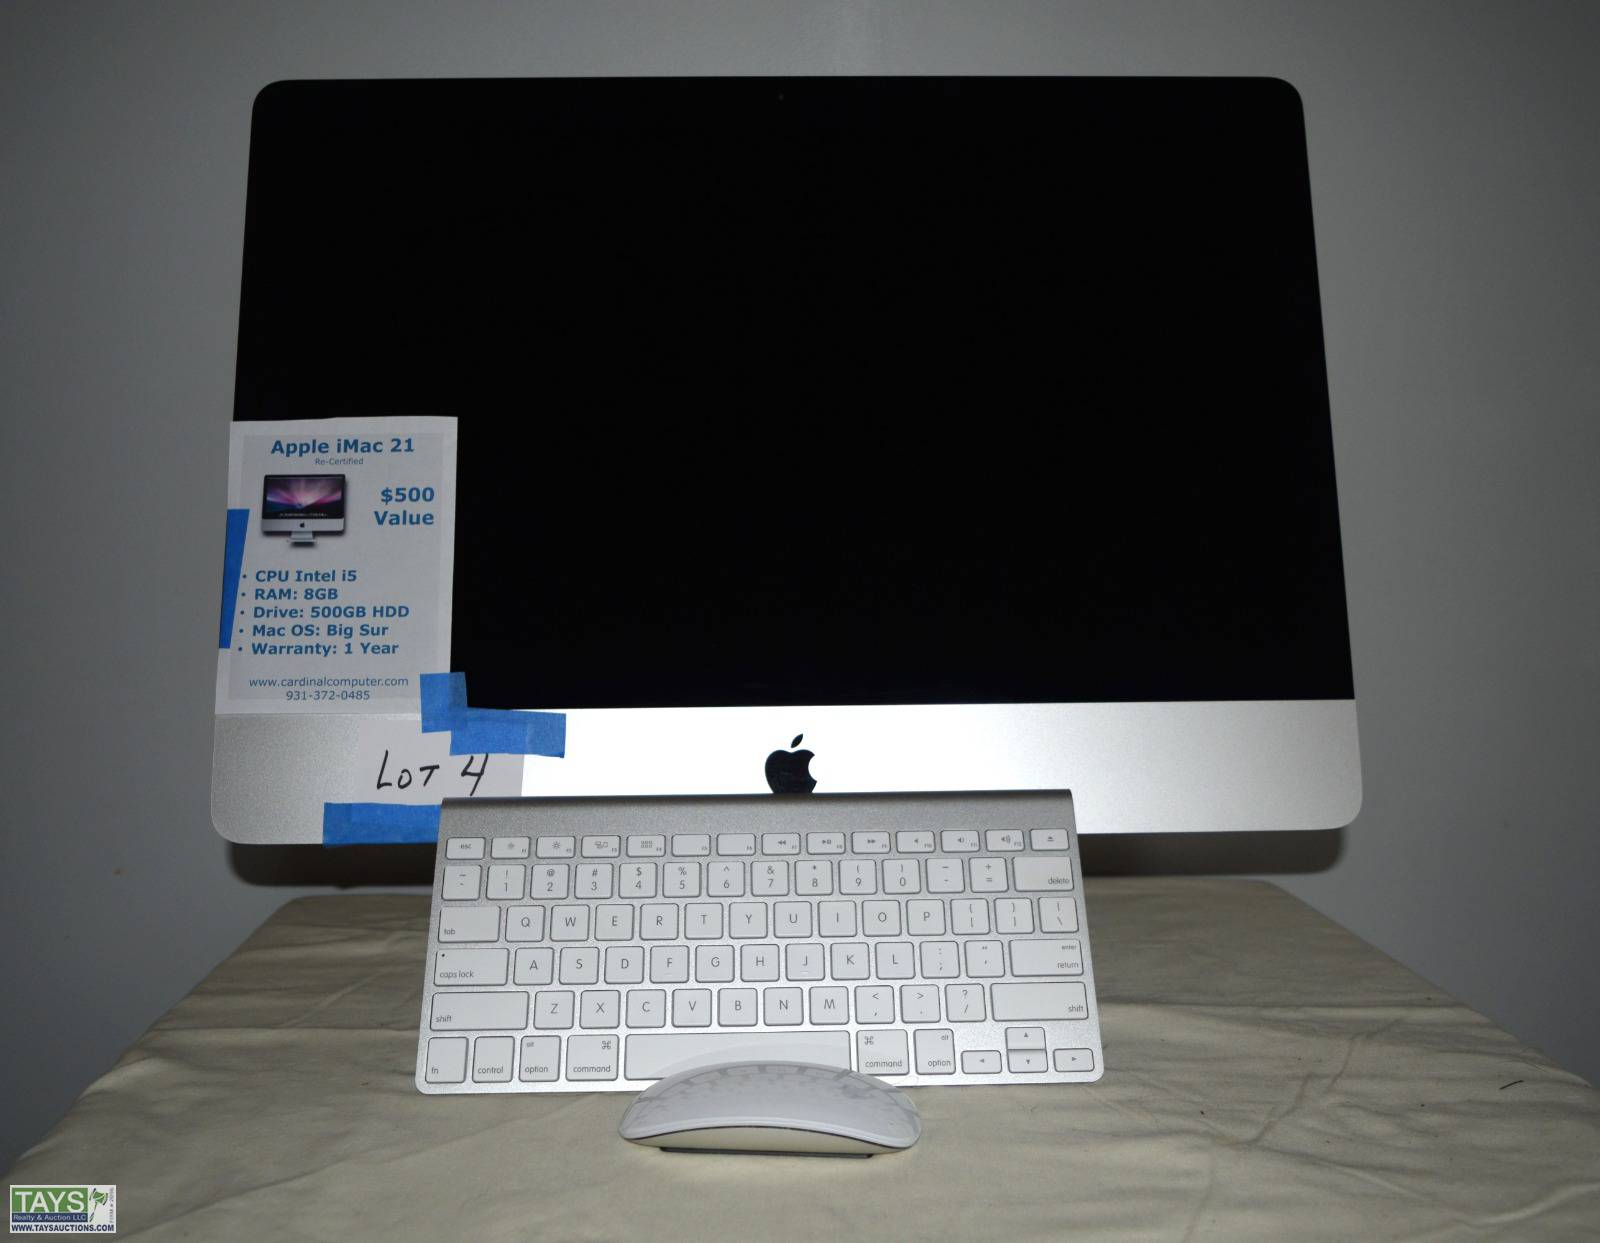 Tays Realty & Auction - Auction: ONLINE BENEFIT AUCTION: 54th ANNUAL  KIWANIS BENEFIT AUCTION ITEM: Apple iMac 21 Re-Certified